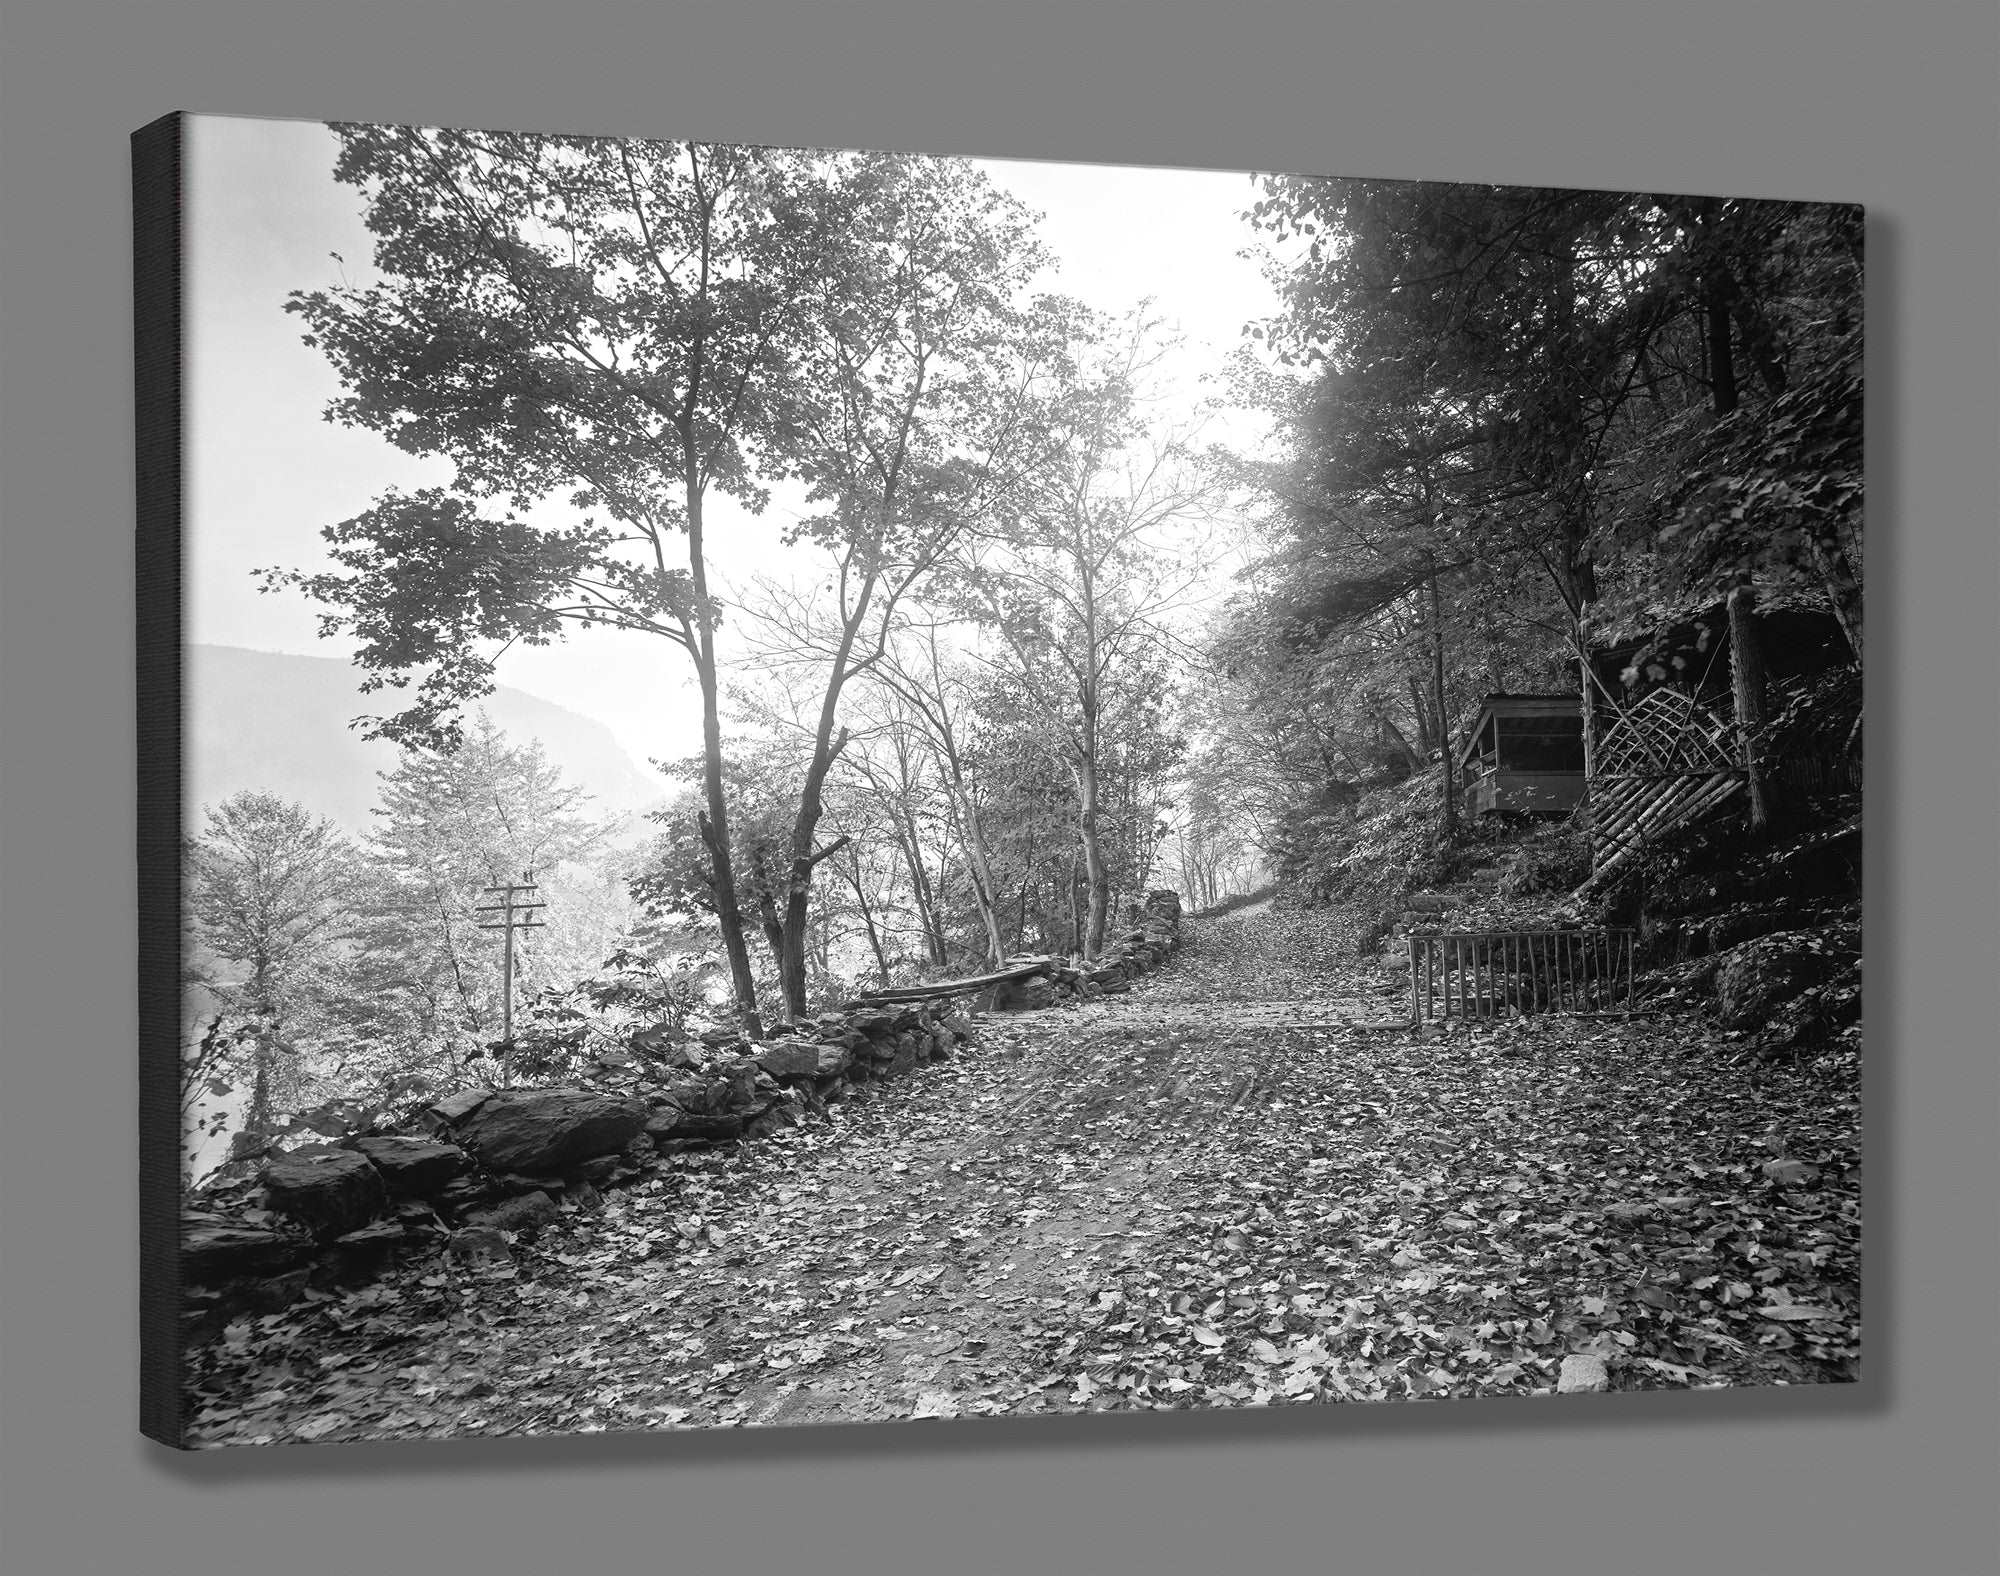 A canvas reproduction print of a vintage photo of the Child's Grotto along the Delaware Water Gap